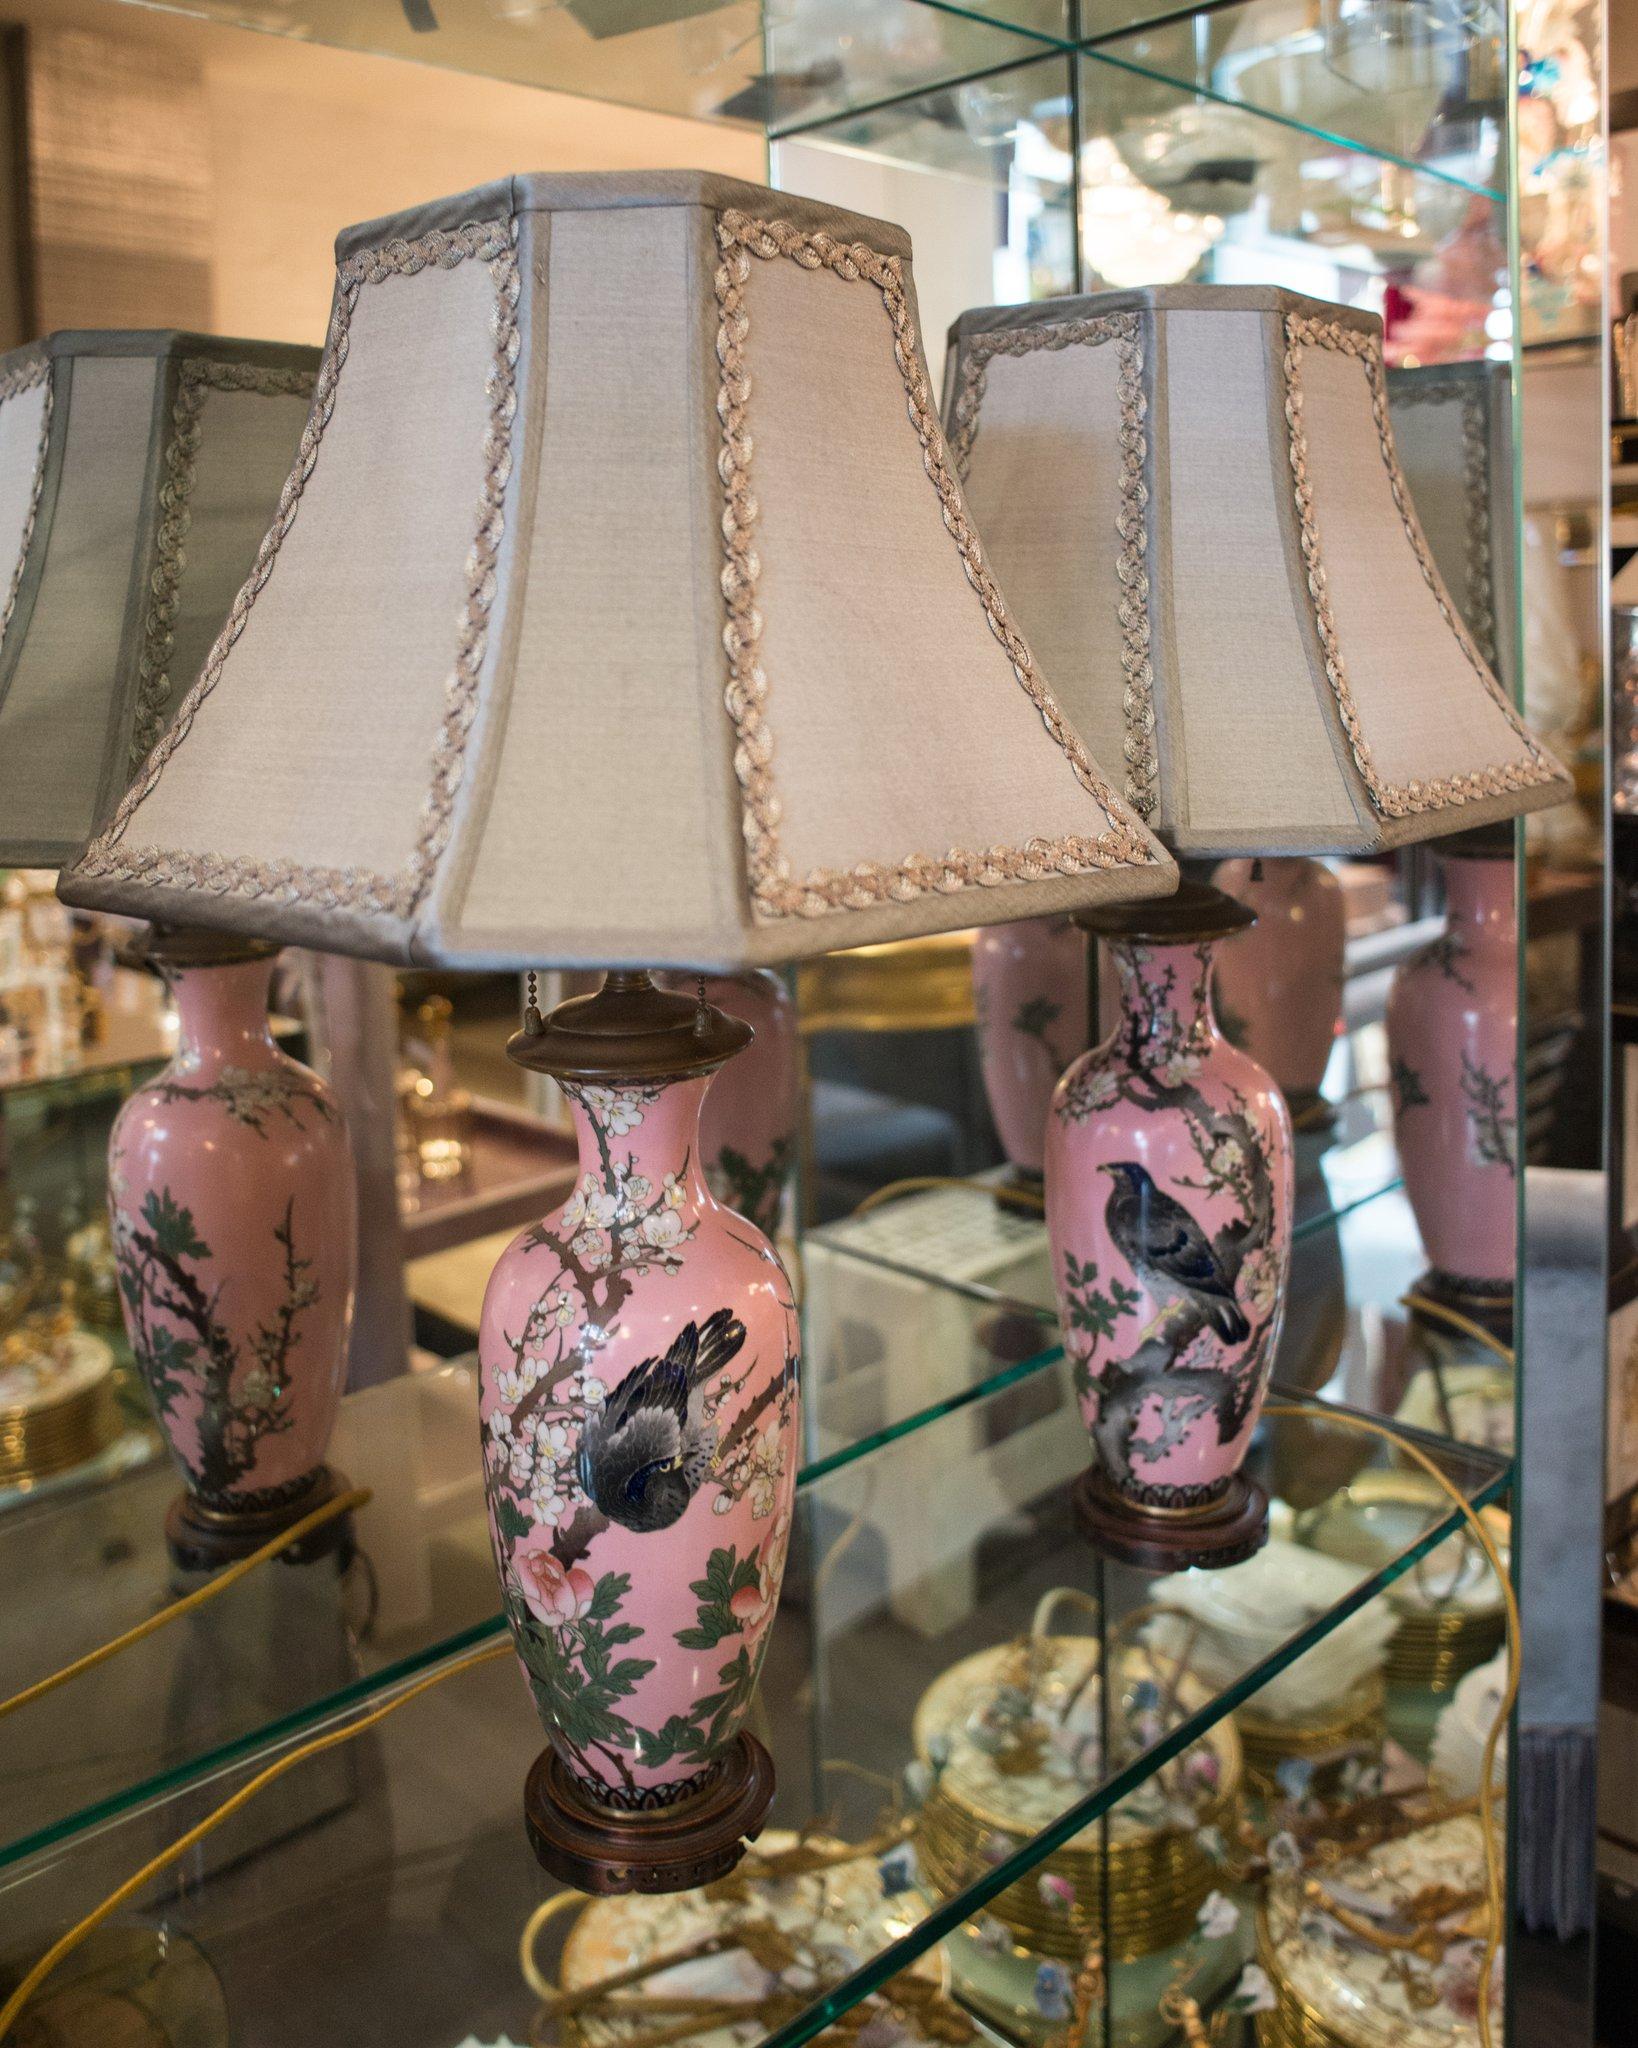 Silk Antique Pair of Japanese Handpainted Pink Porcelain Lamps with Silver Shades